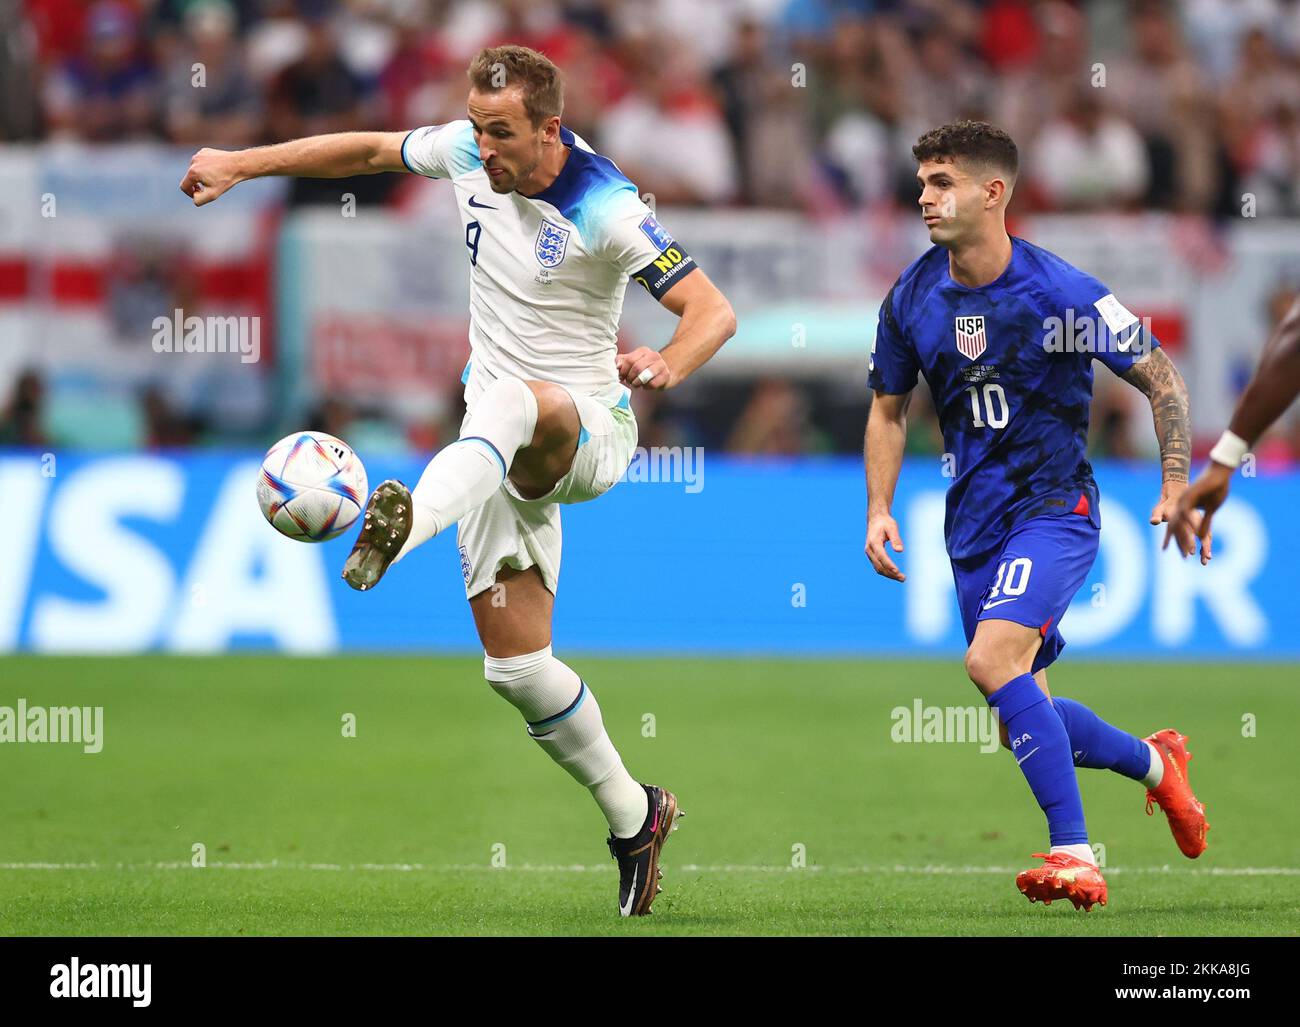 Al Khor, Qatar, 25th November 2022. Harry Kane of England controls the ball in front off Christian Pulisic of USA  during the FIFA World Cup 2022 match at Al Bayt Stadium, Al Khor. Picture credit should read: David Klein / Sportimage Credit: Sportimage/Alamy Live News Credit: Sportimage/Alamy Live News Credit: Sportimage/Alamy Live New Credit: Sportimage/Alamy Live News Stock Photo